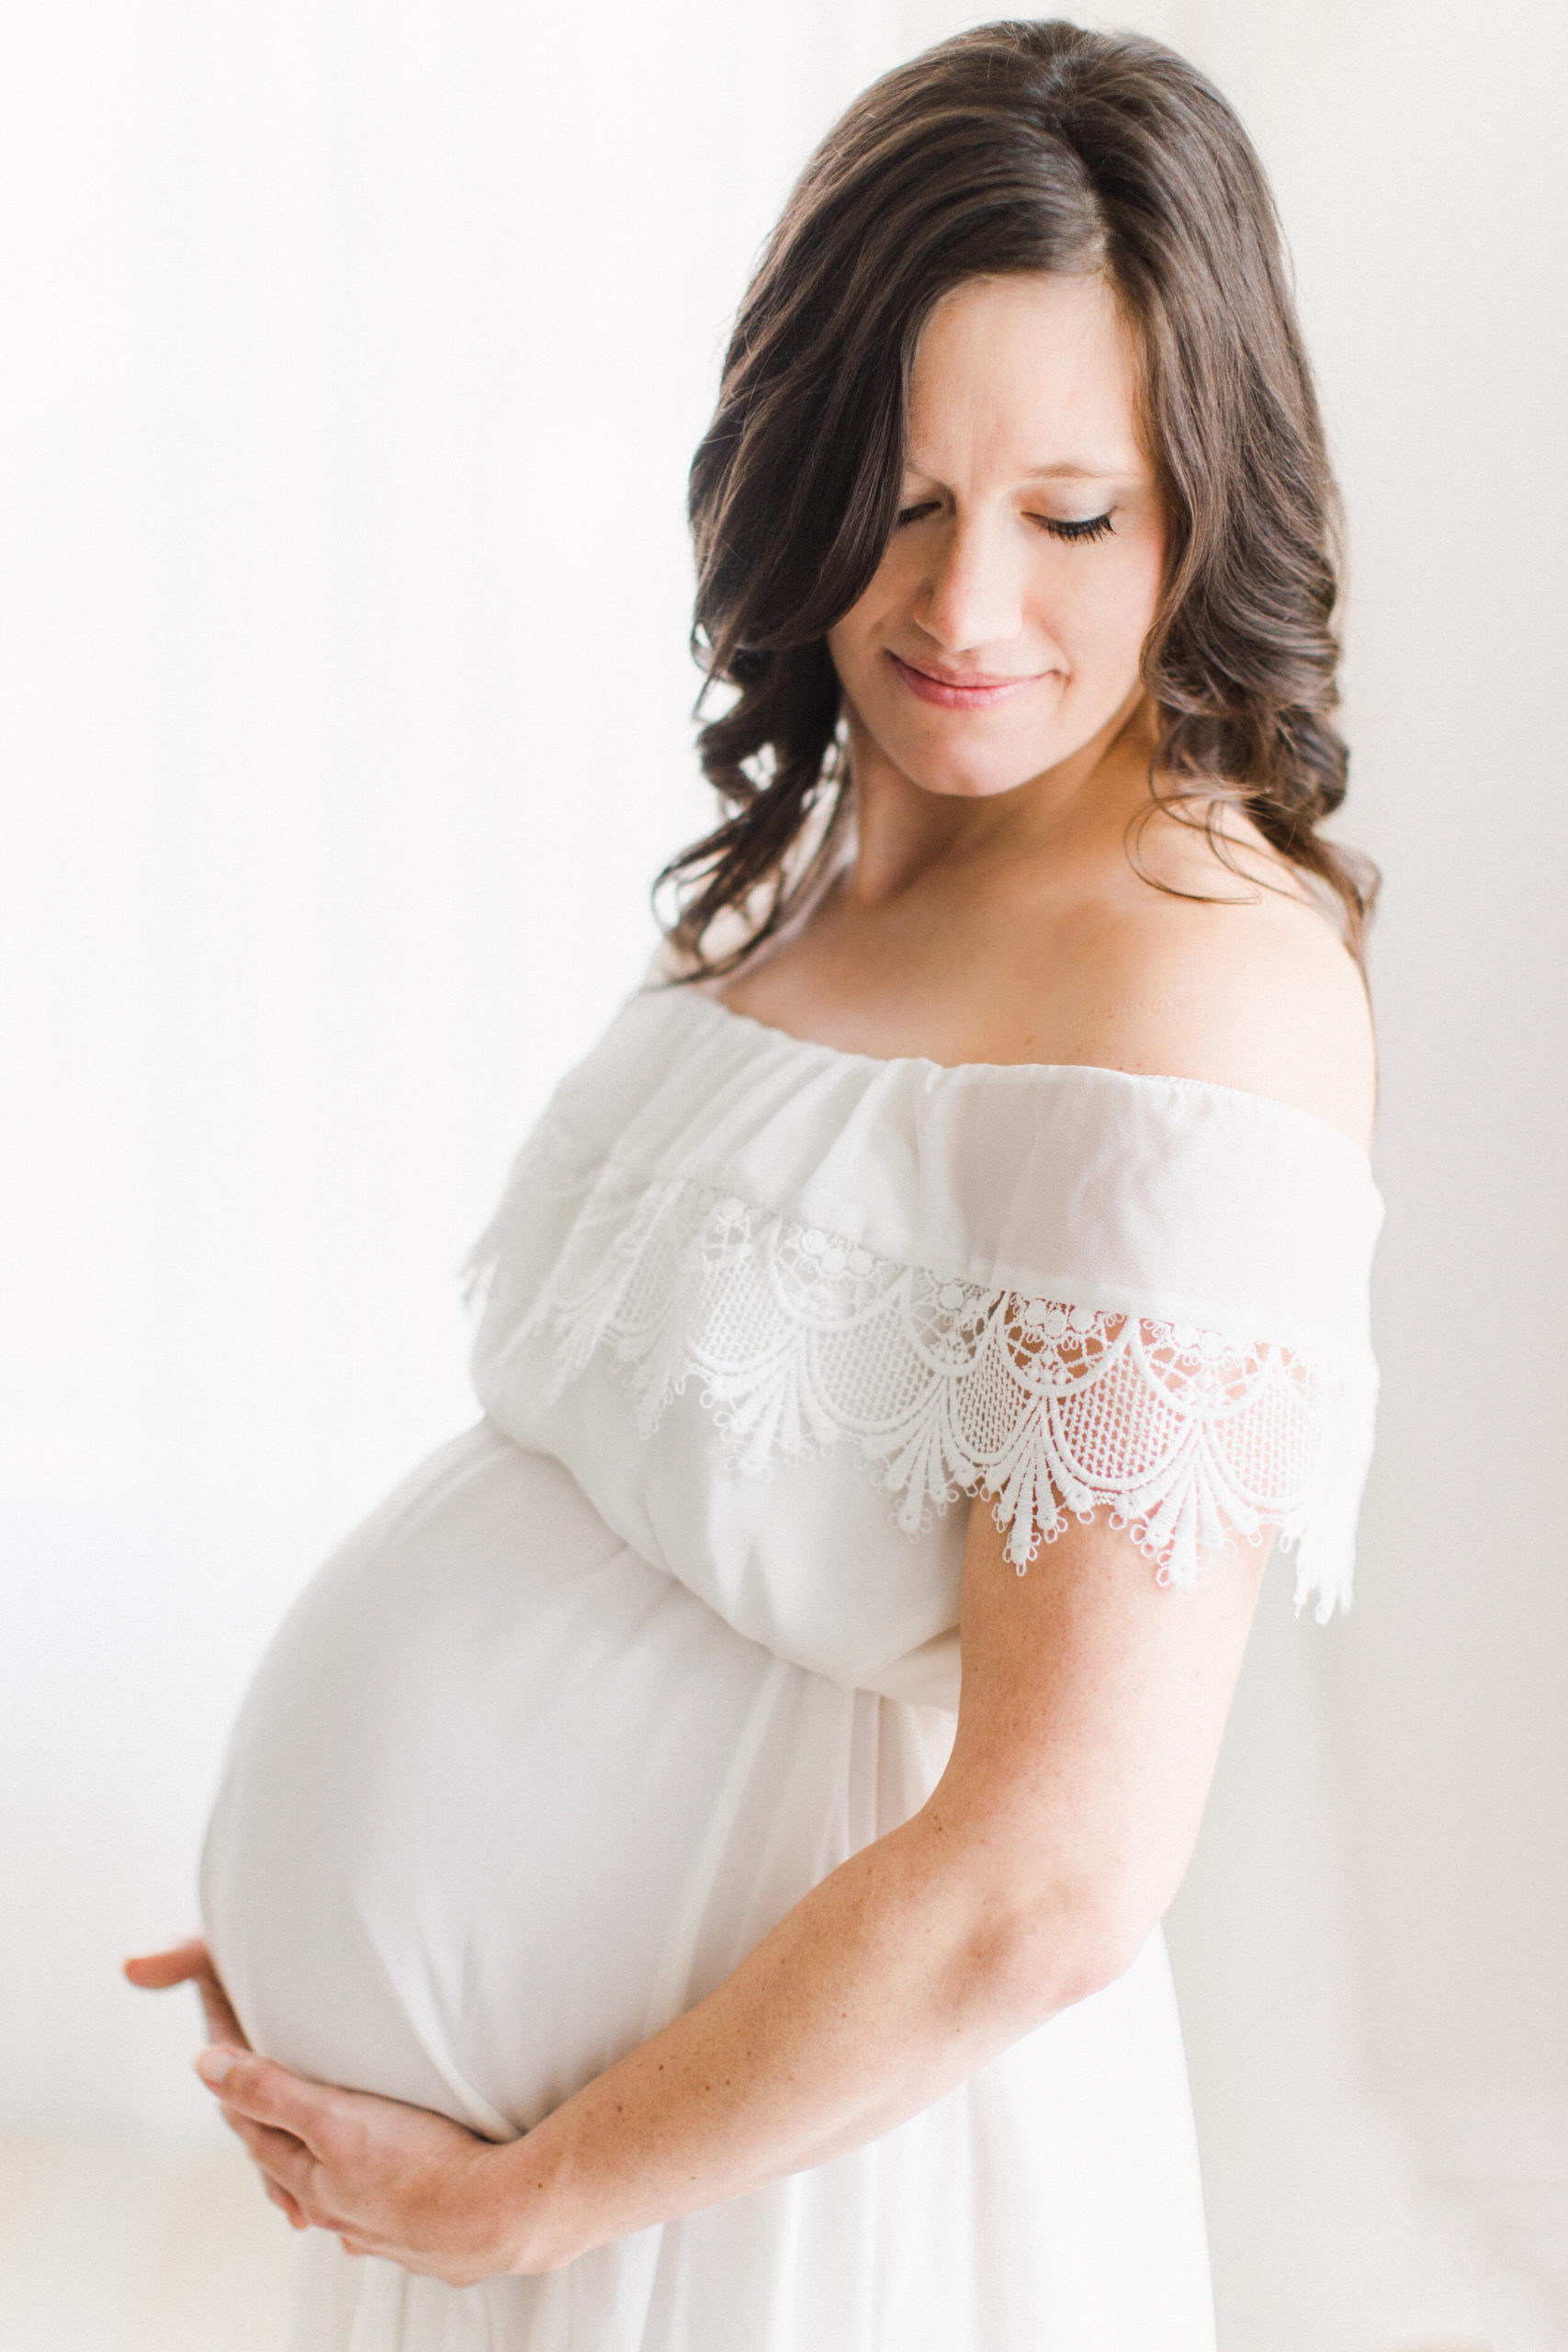 Timeless Pregnancy Photos in NWA